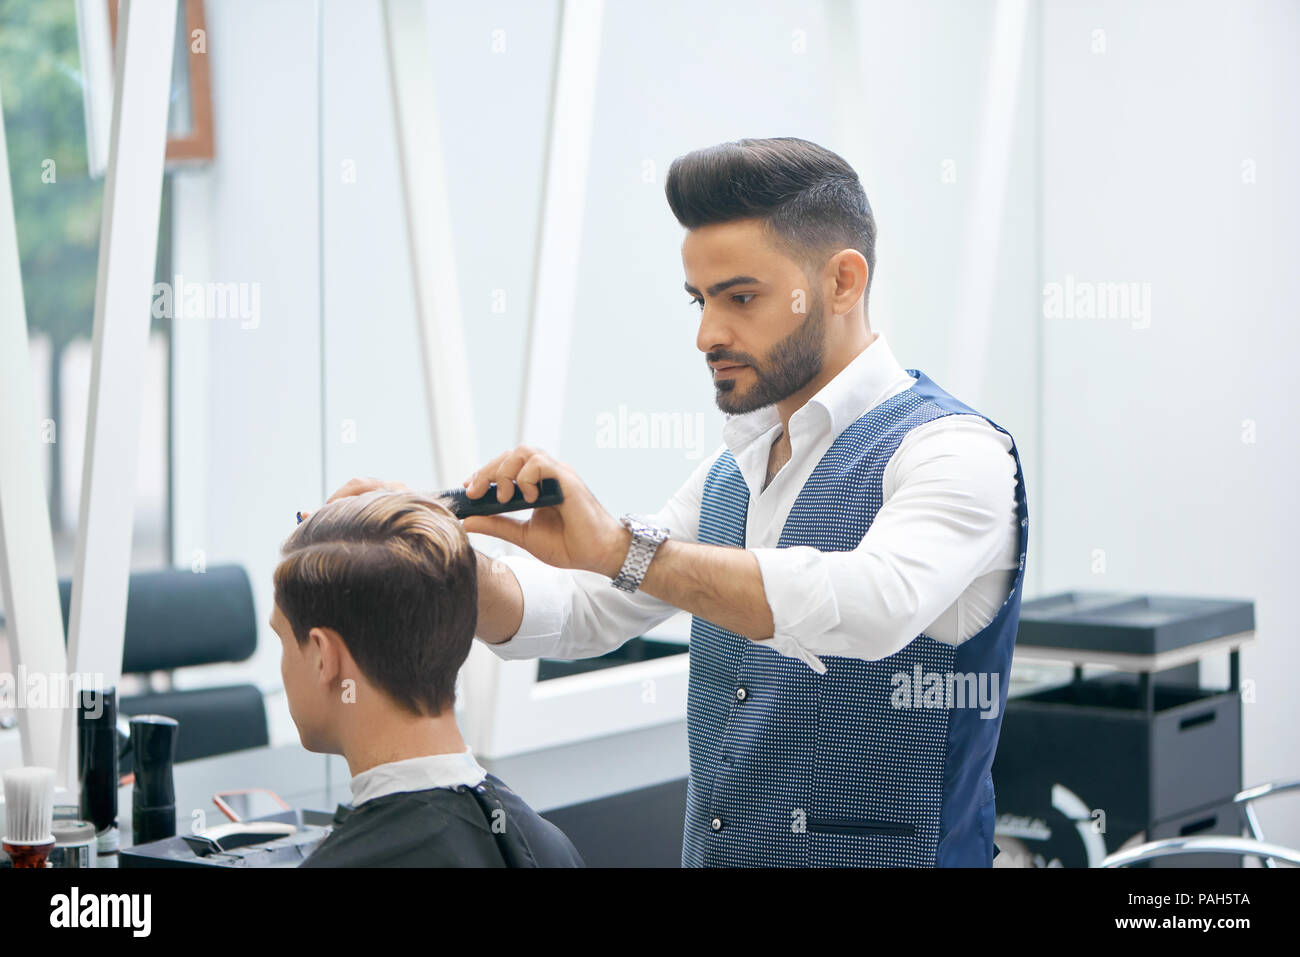 Barber doing new haircut for young client using black plastic comb. Wearing white casual shirt, grey waistcoat, watch. Looking concentrated, loving his job. Model covered with special black cape. Stock Photo